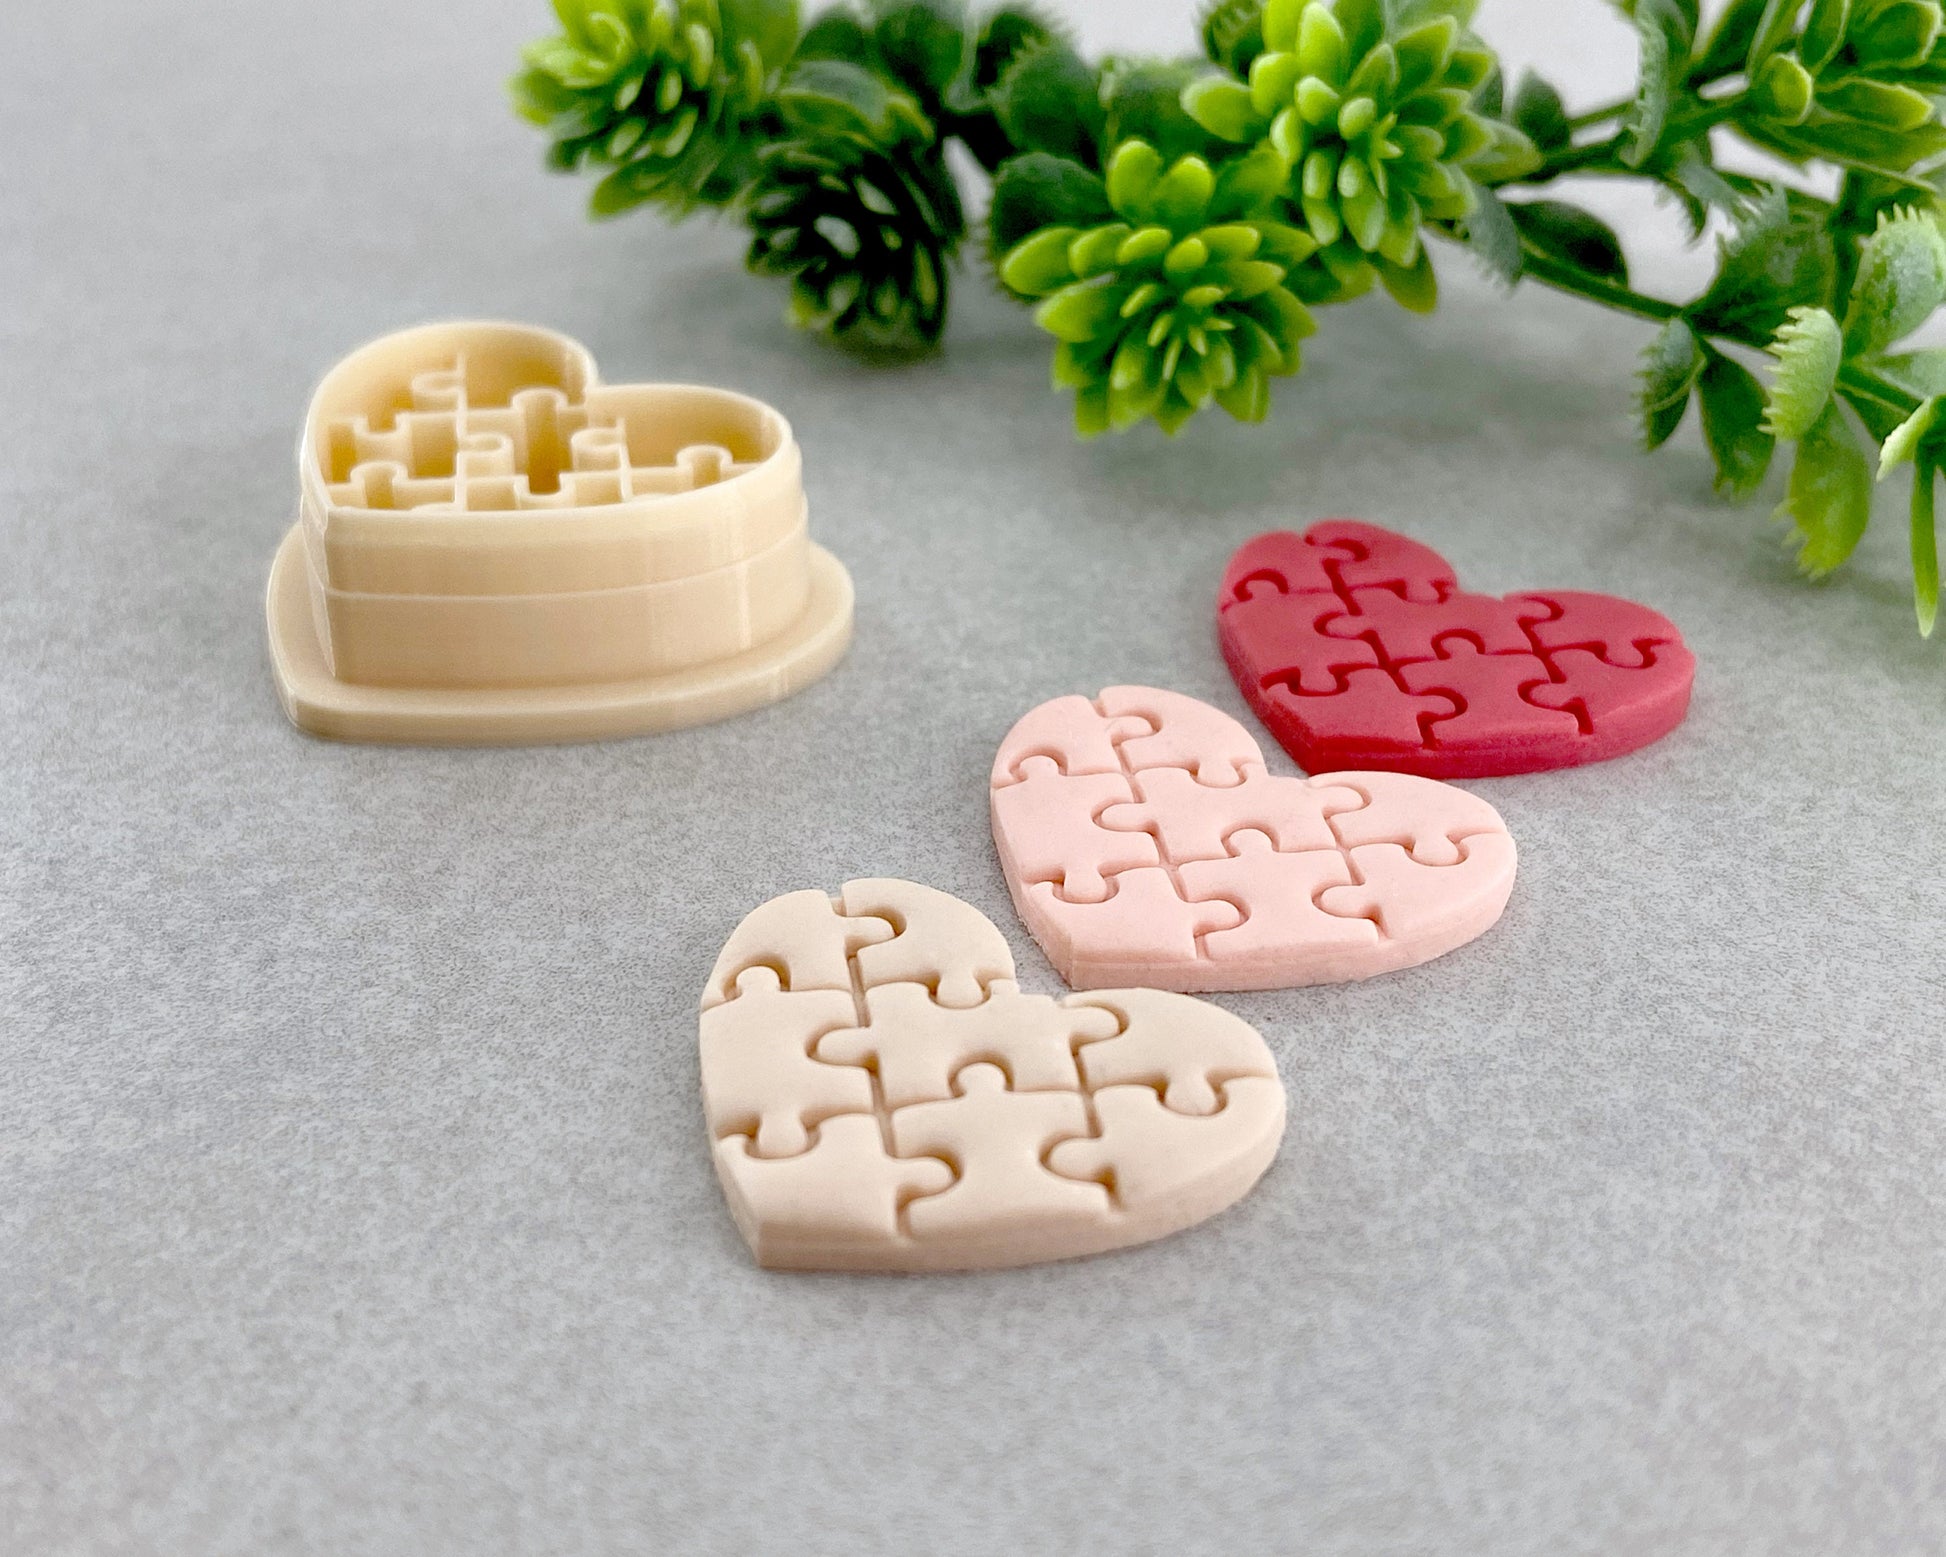 New! Scalloped Heart Valentines Day Cookie Cutter Polymer Clay Fondant  Cutters